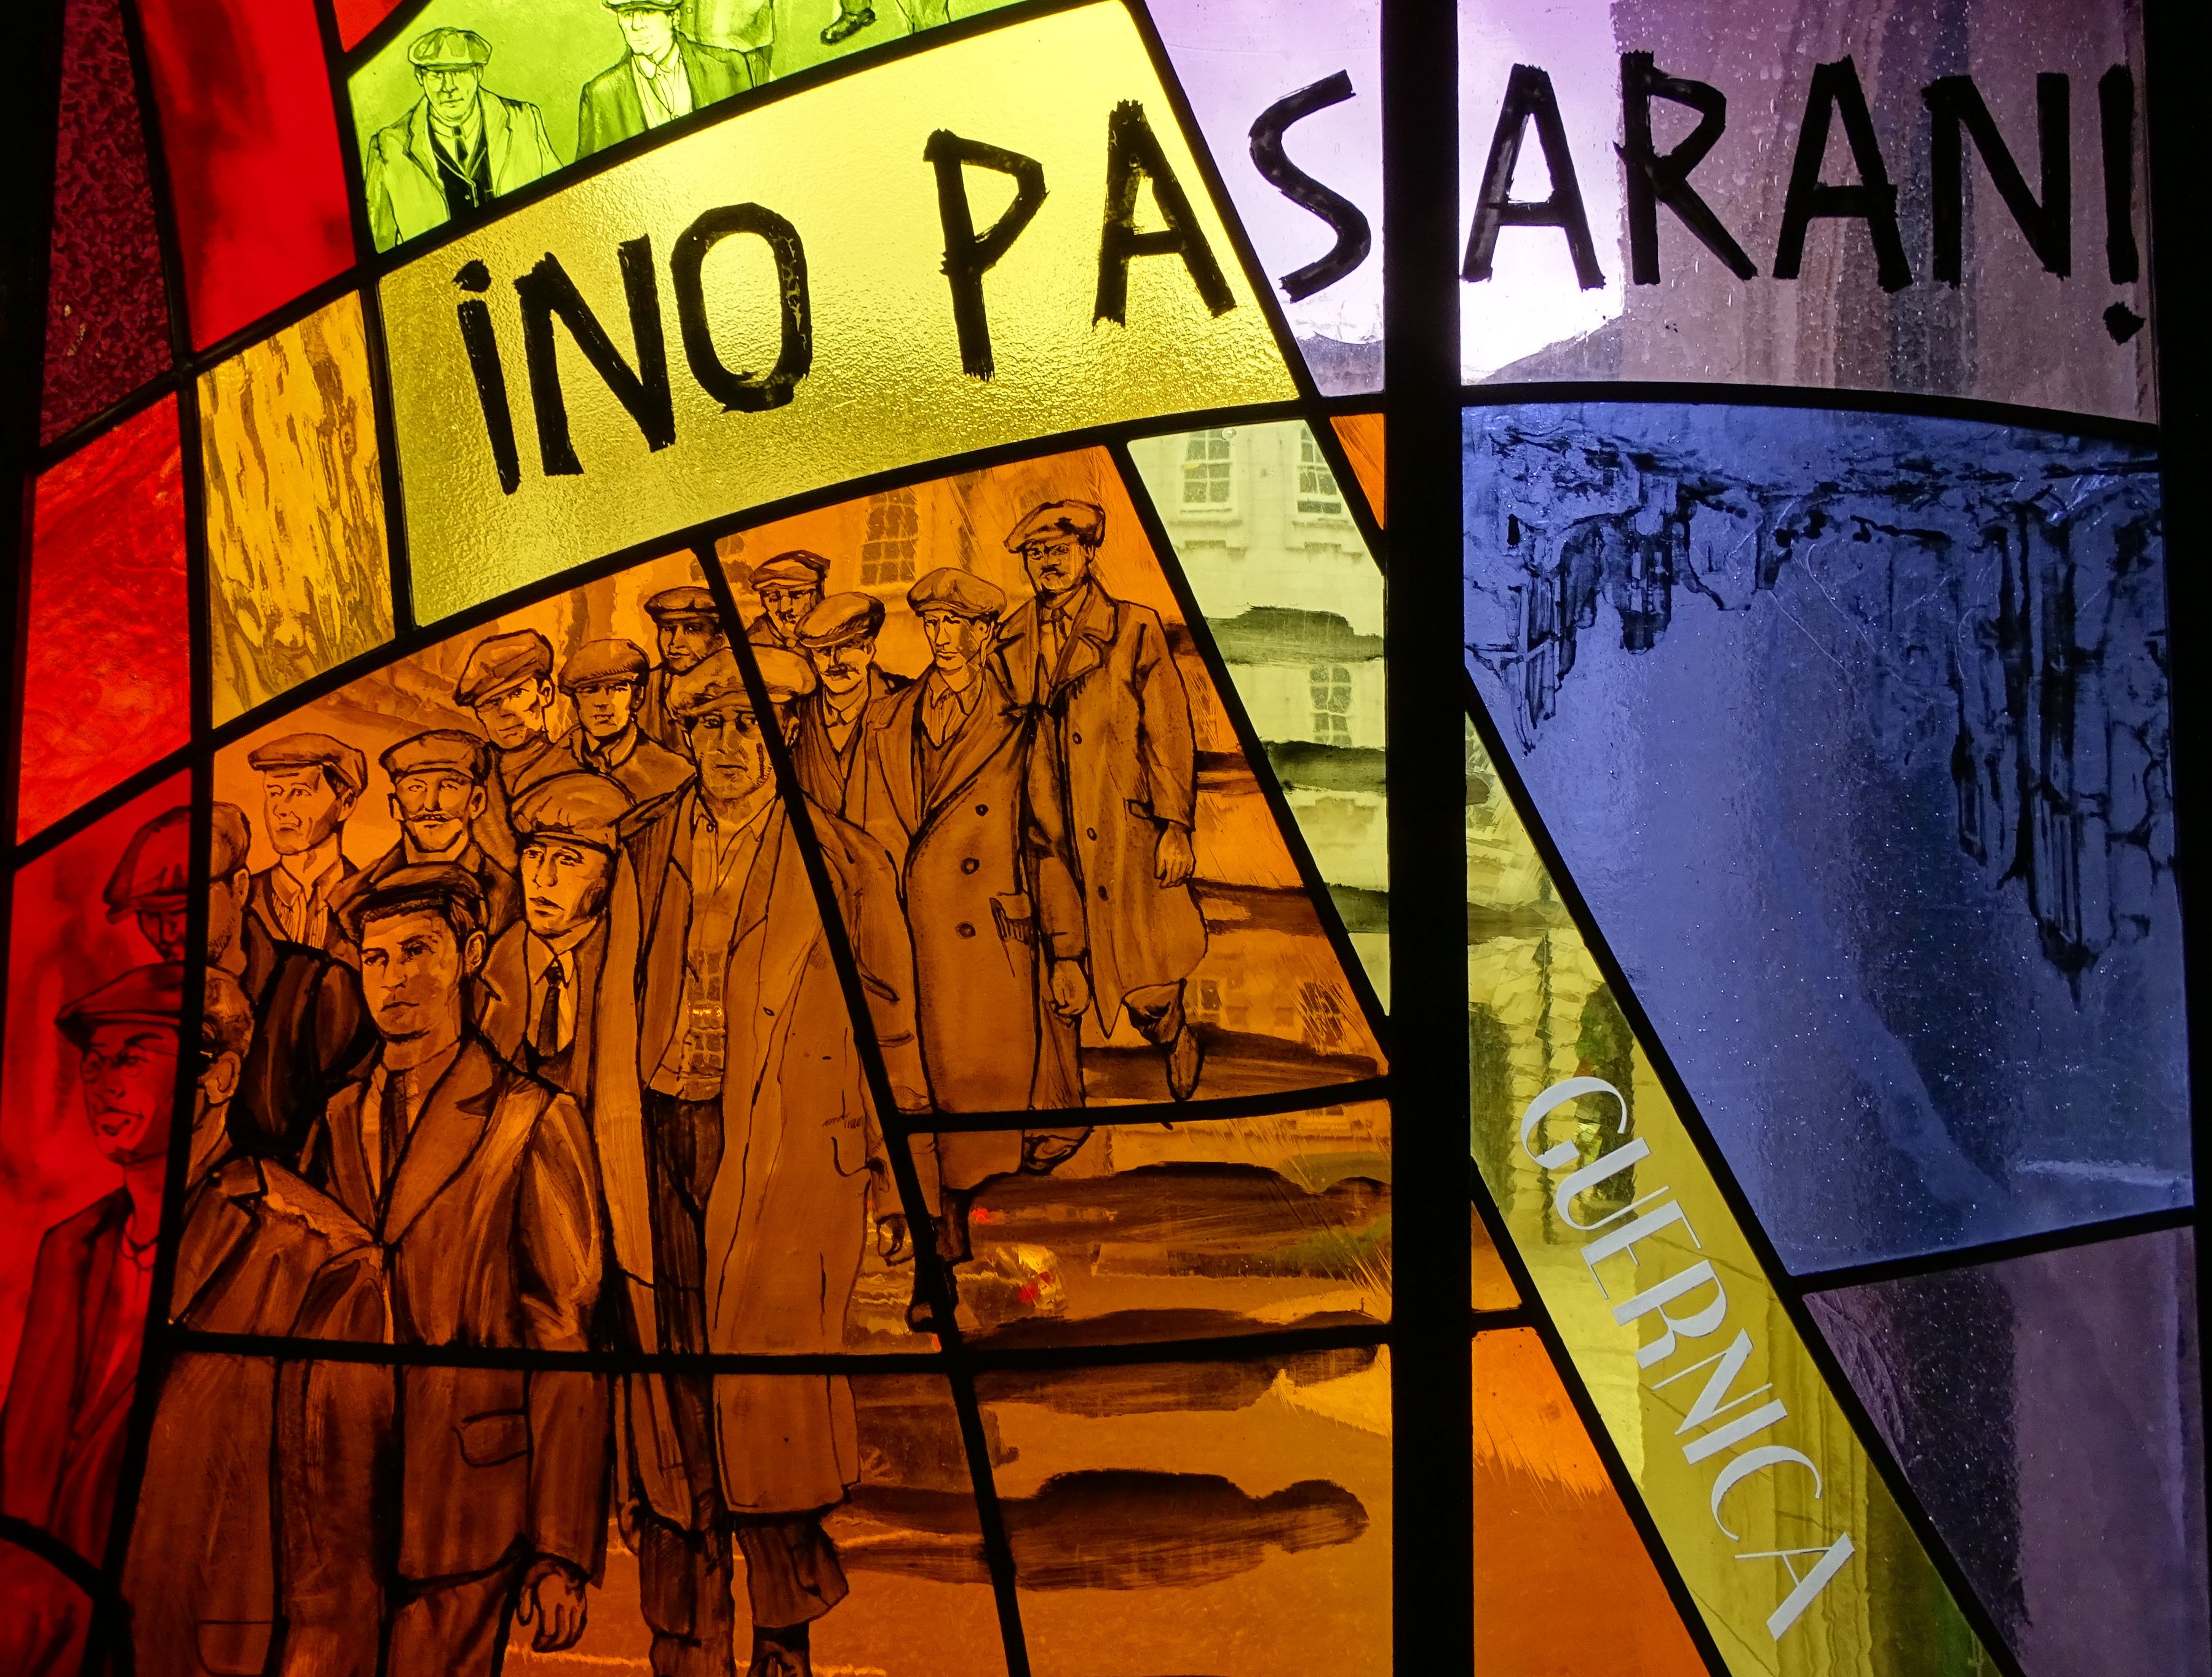 THEY SHALL NOT PASS: The talks will commemorate those who fought Fascism during the Spanish Civil War